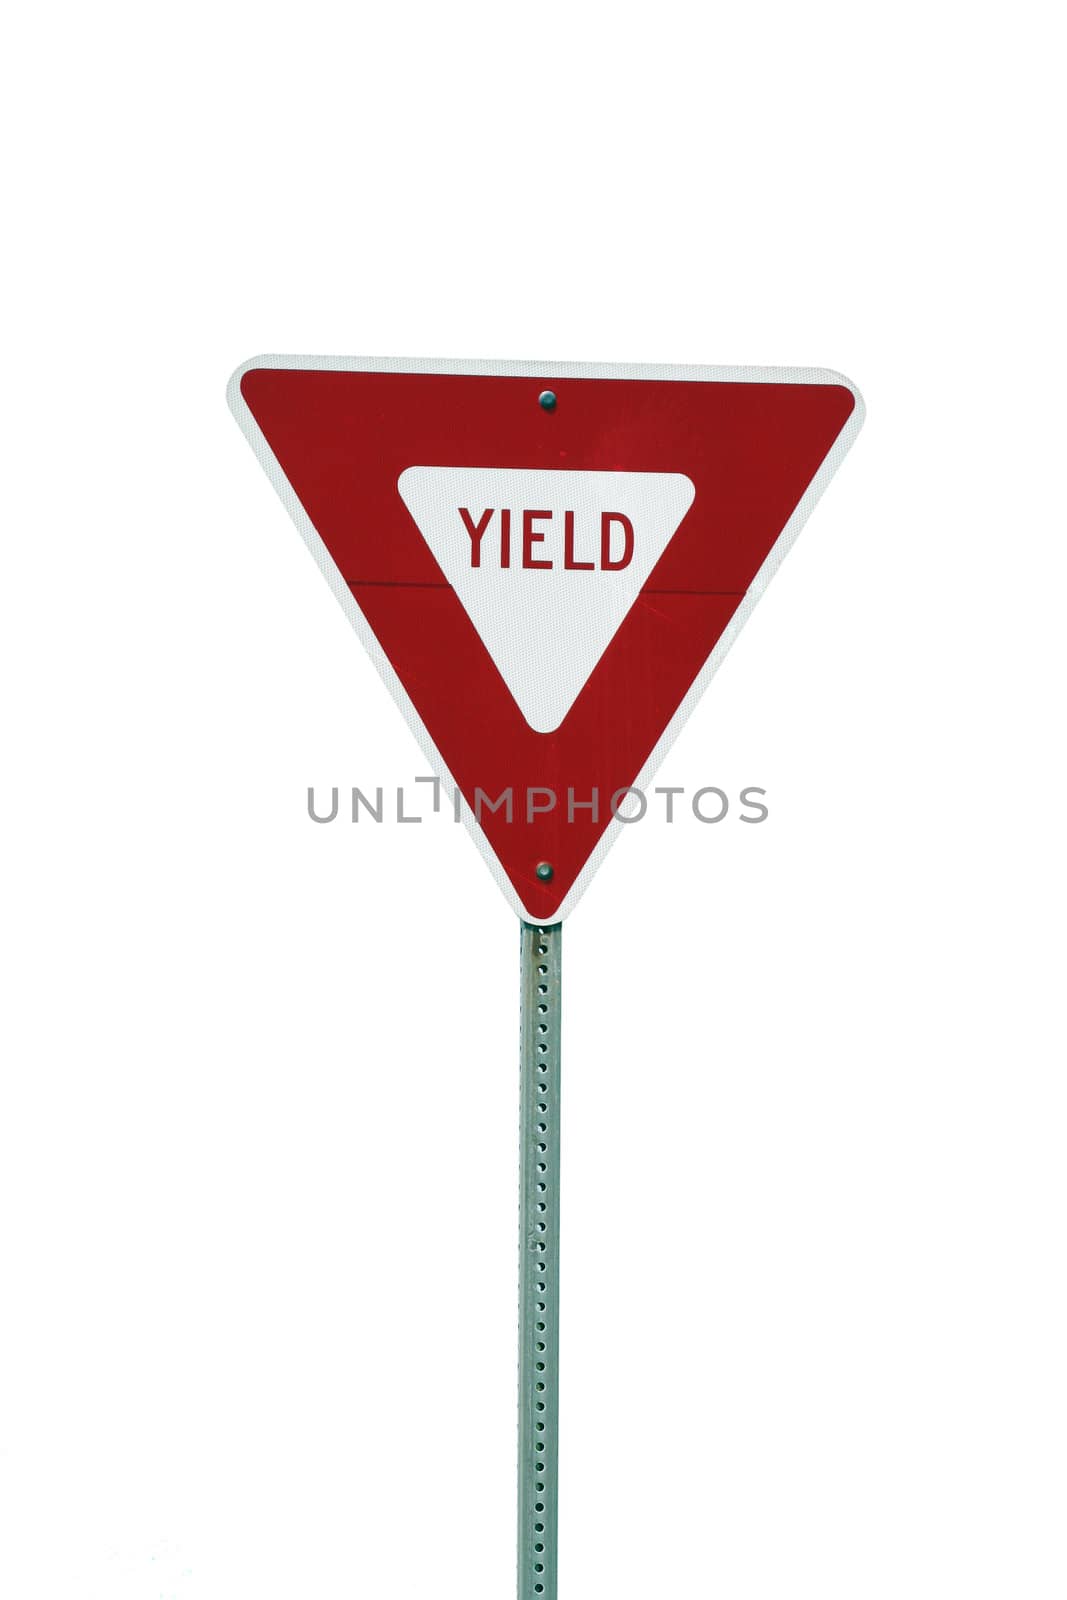 A Isolated yield sign on white background